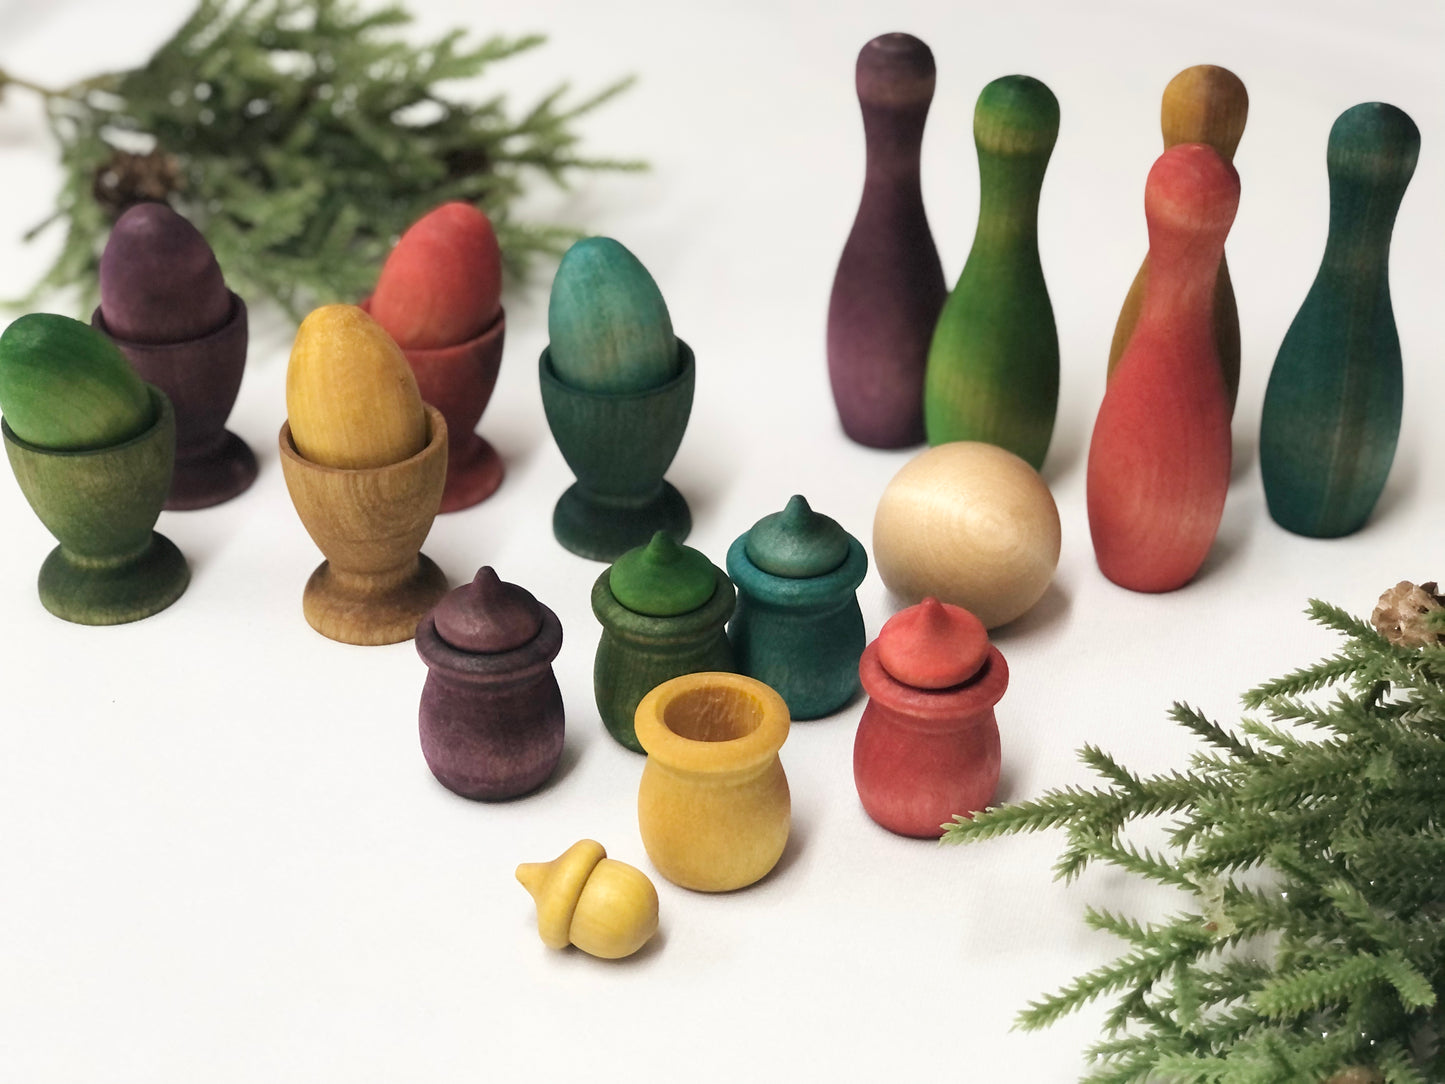 Naturally Dyed Rainbow Wooden Bowling Pins